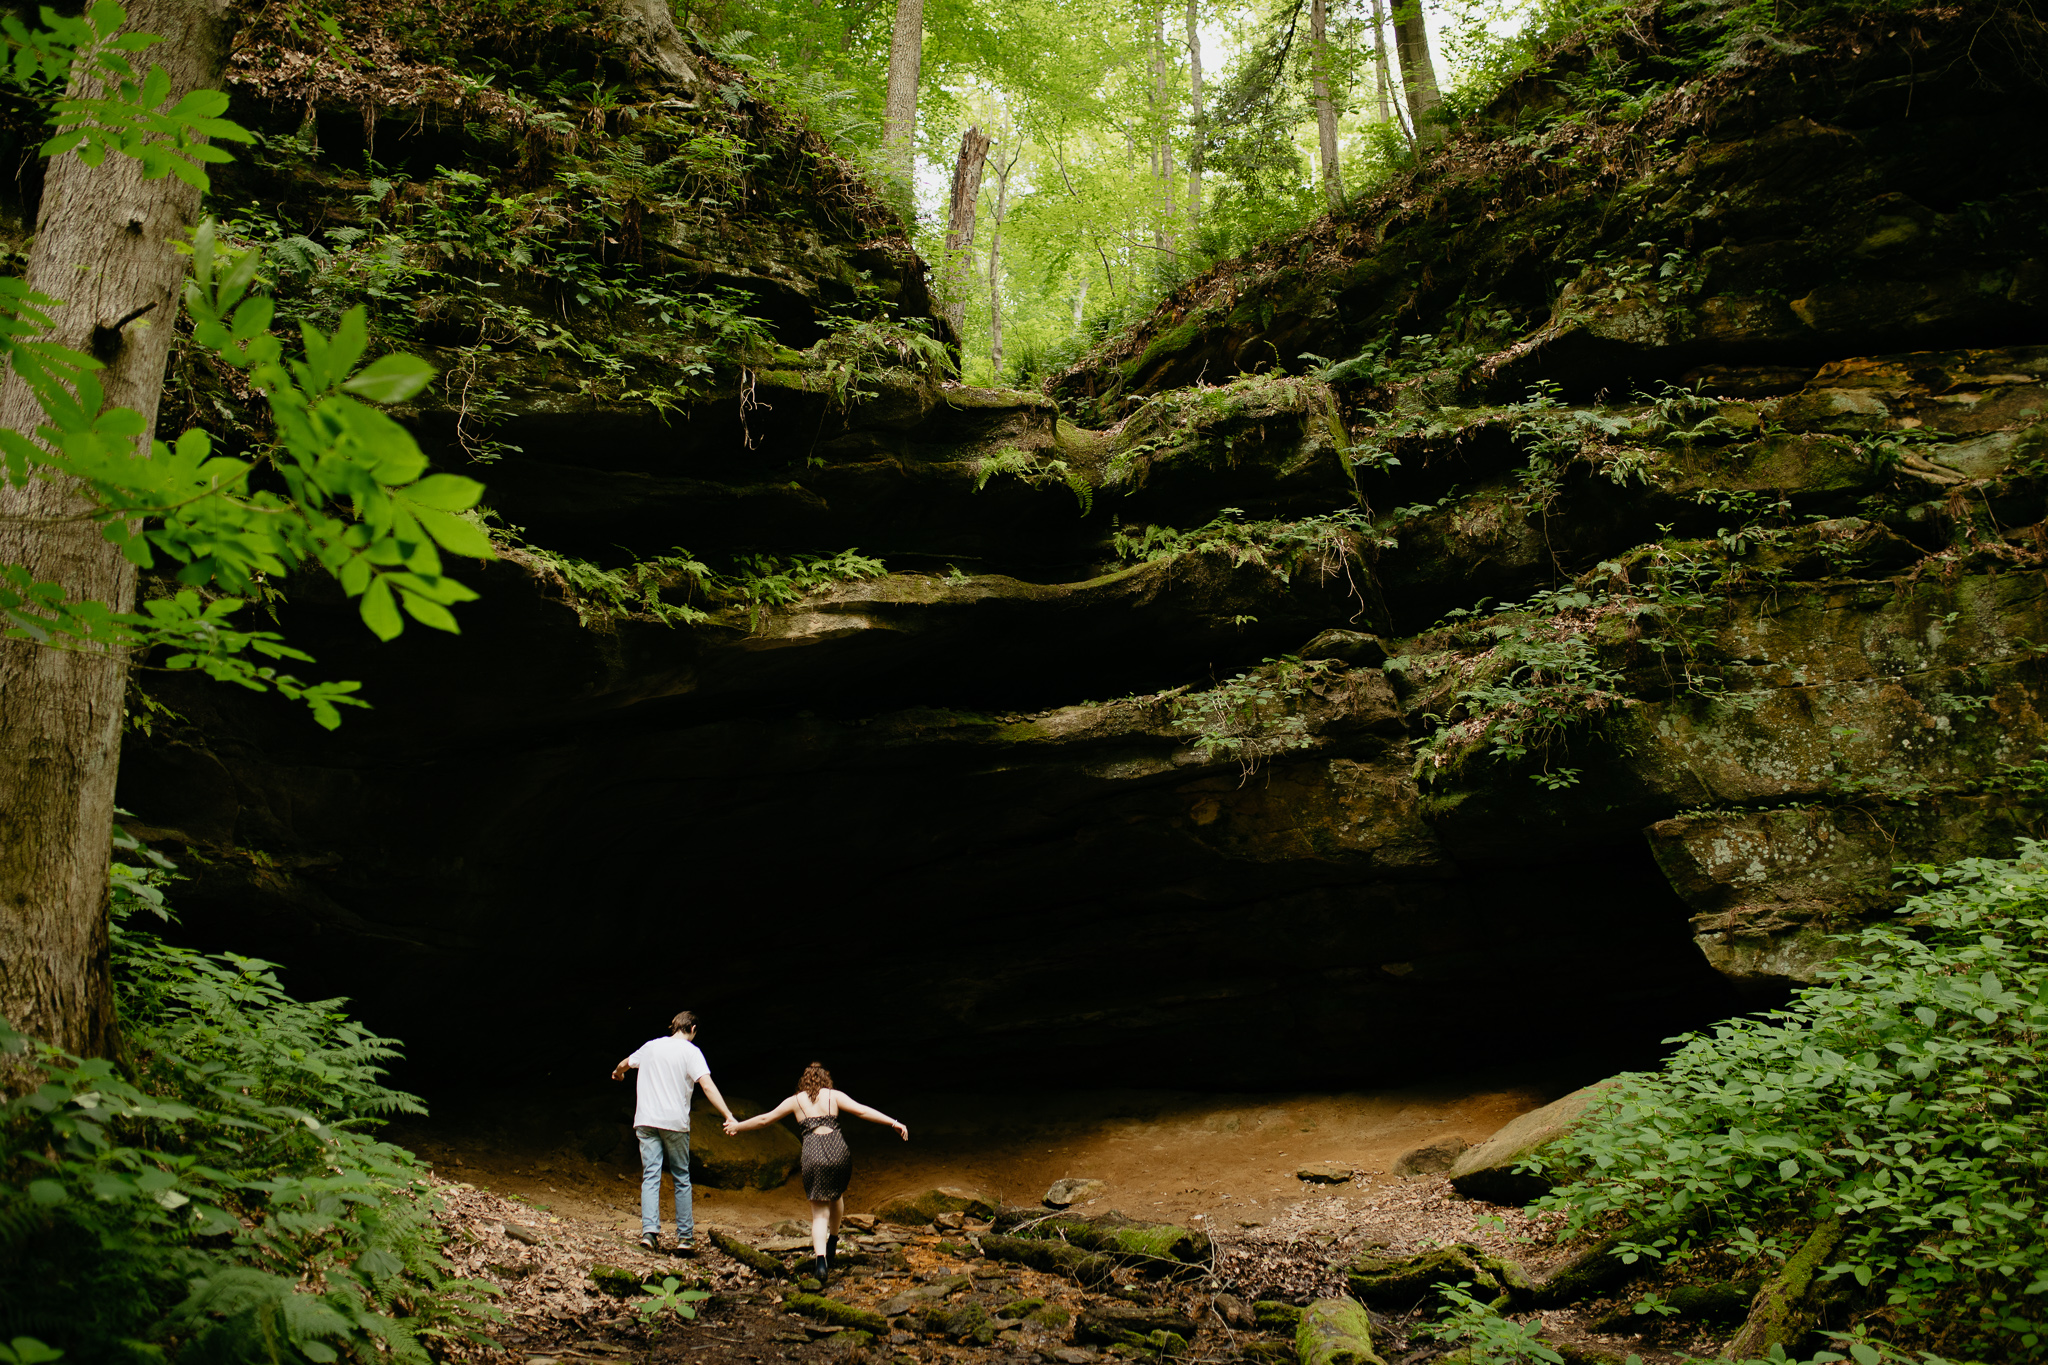 Engagement Session at Shades State Park, Indiana, exploring caves and lush green canyons